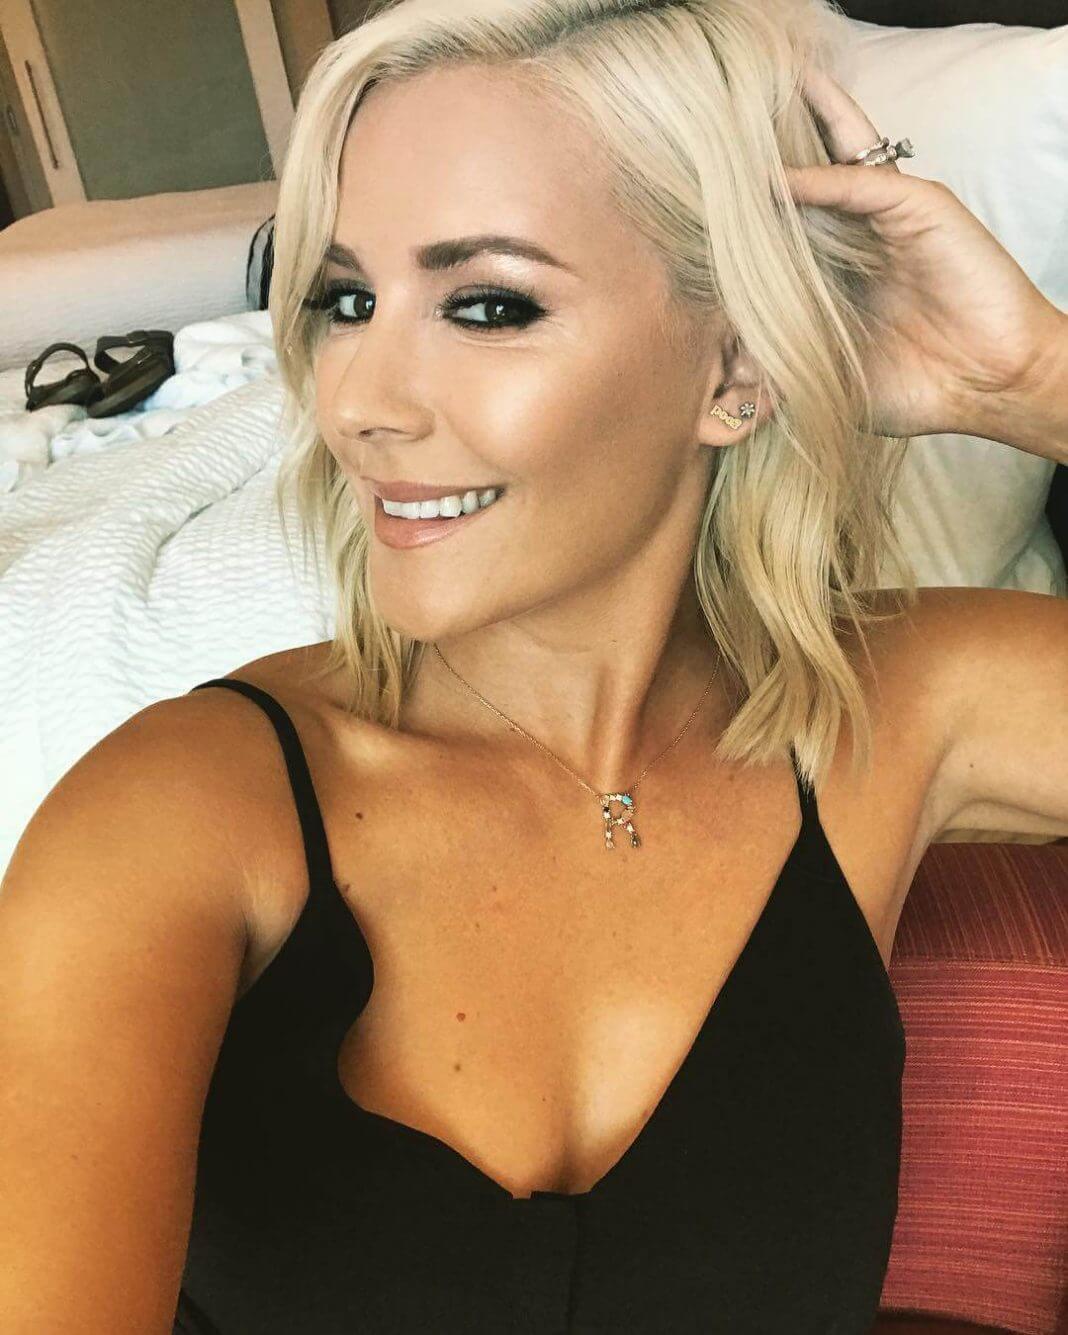 49 Renee Young Nude Pictures Present Her Polarizing Appeal 39